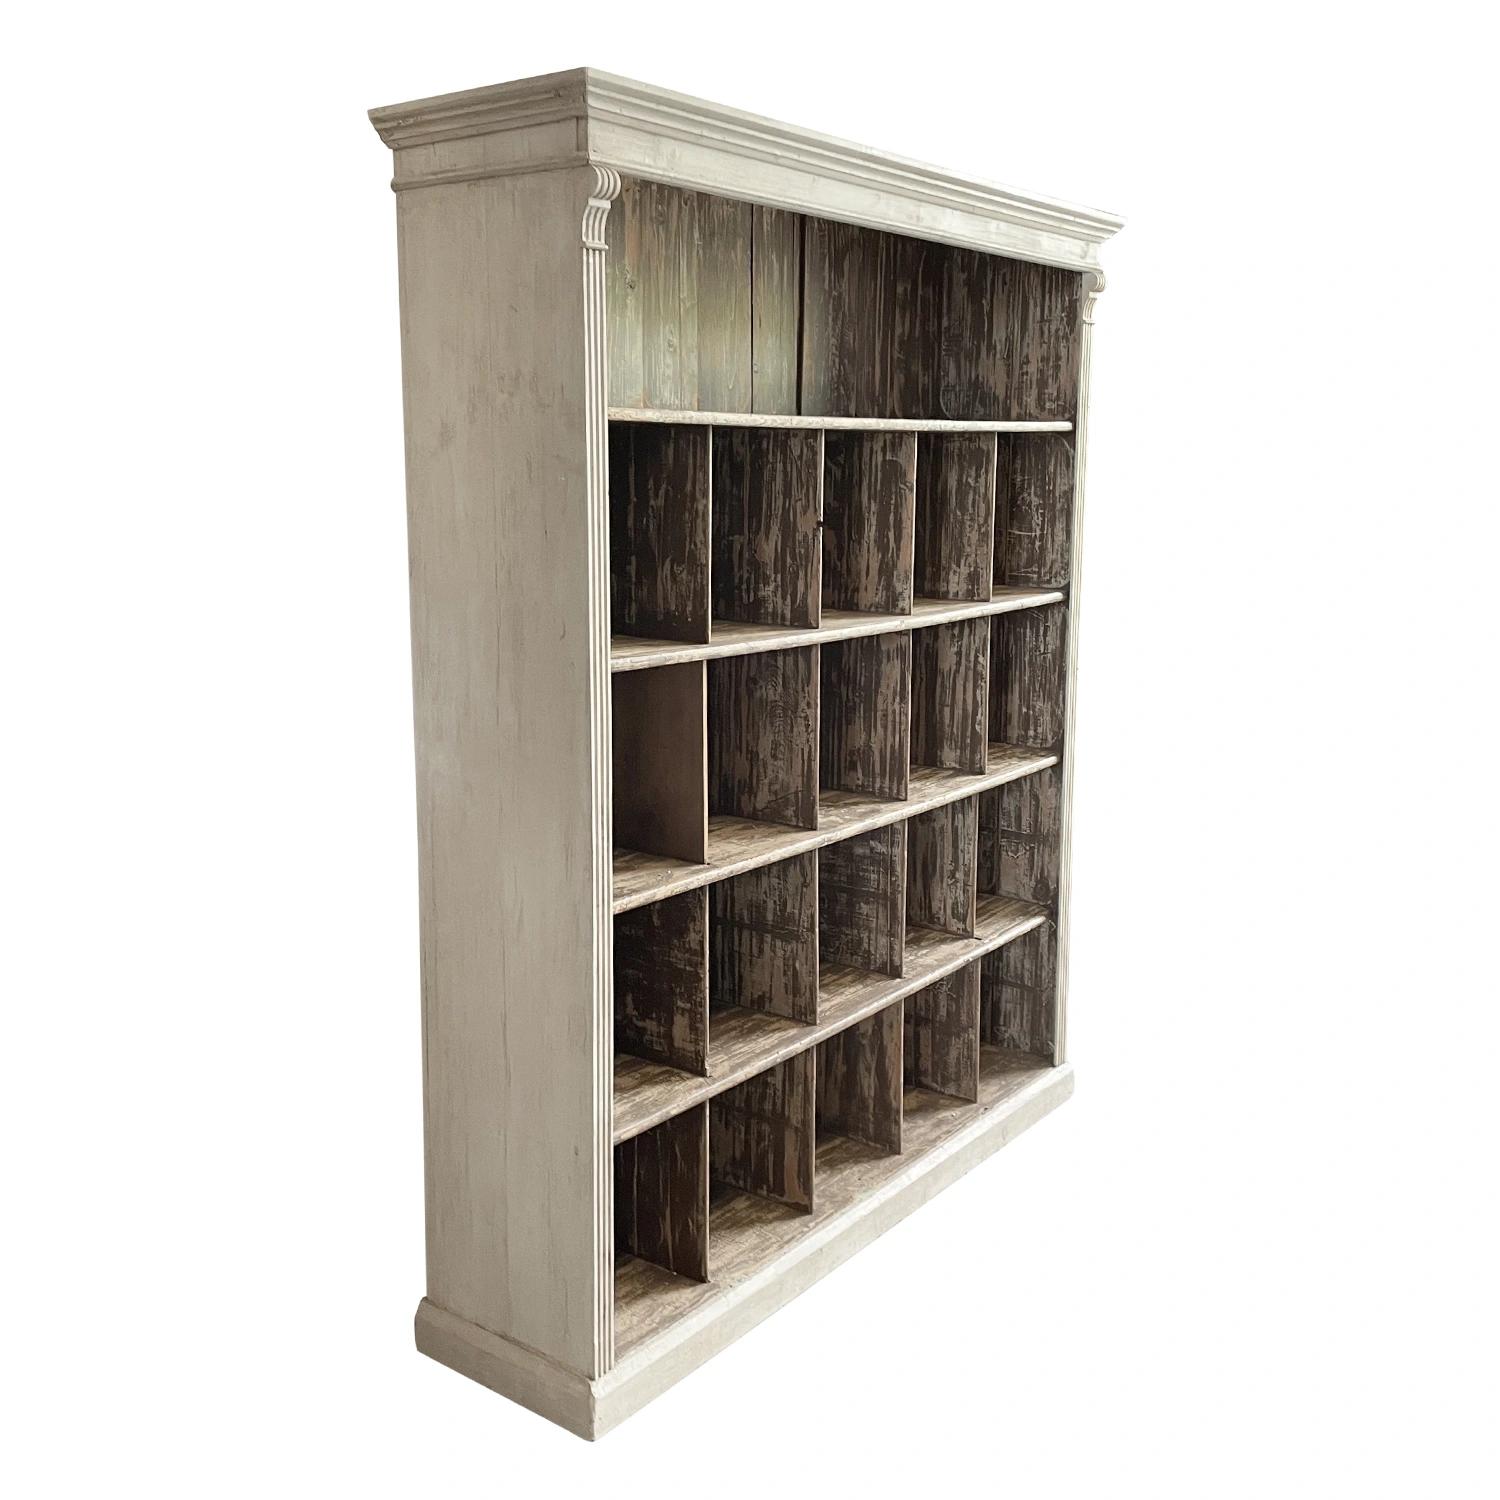 An antique shelf cupboard in patinated Pinewood with top and lateral molding, in good condition. This early 19th Century furniture is perfect to display collections or to be used as a book shelf. Wear consistent with age and use. Circa 1830,